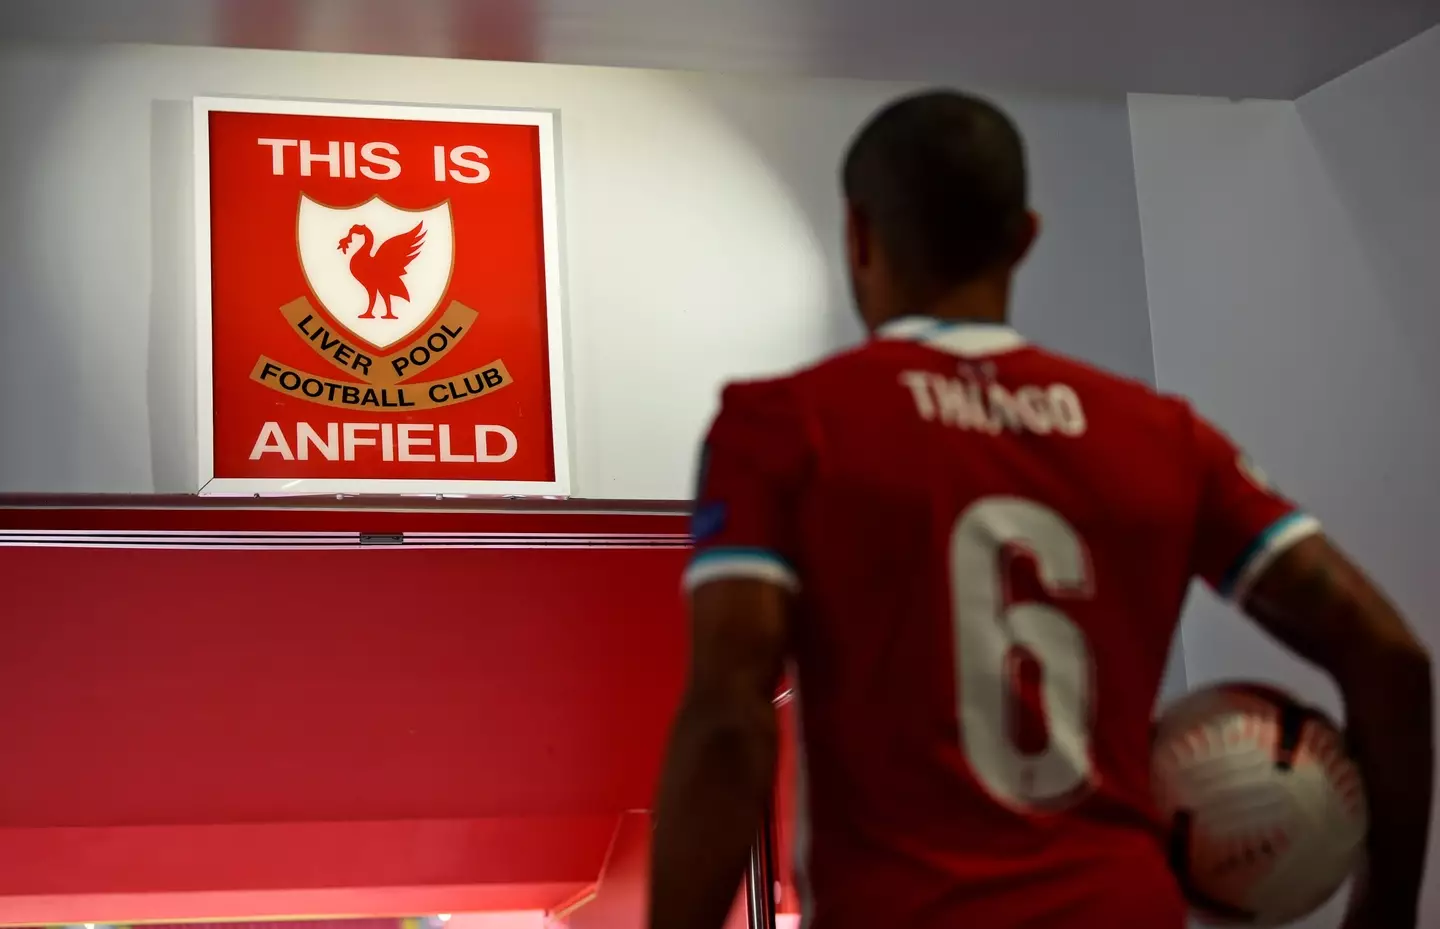 Jurgen Klopp had banned players from touching the 'This is Anfield' sign until they had won a trophy (Getty)